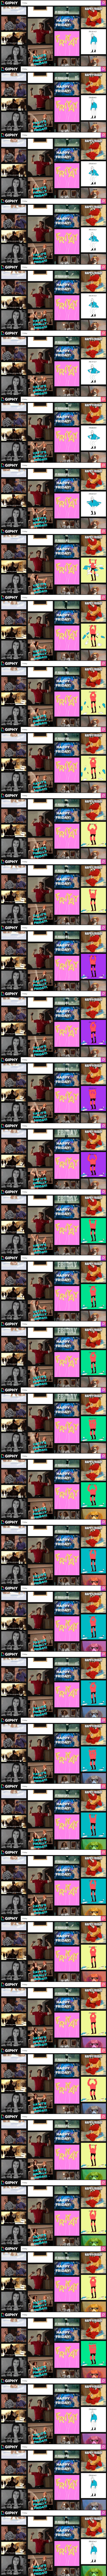 Giphy search for the keyword 'friday'.